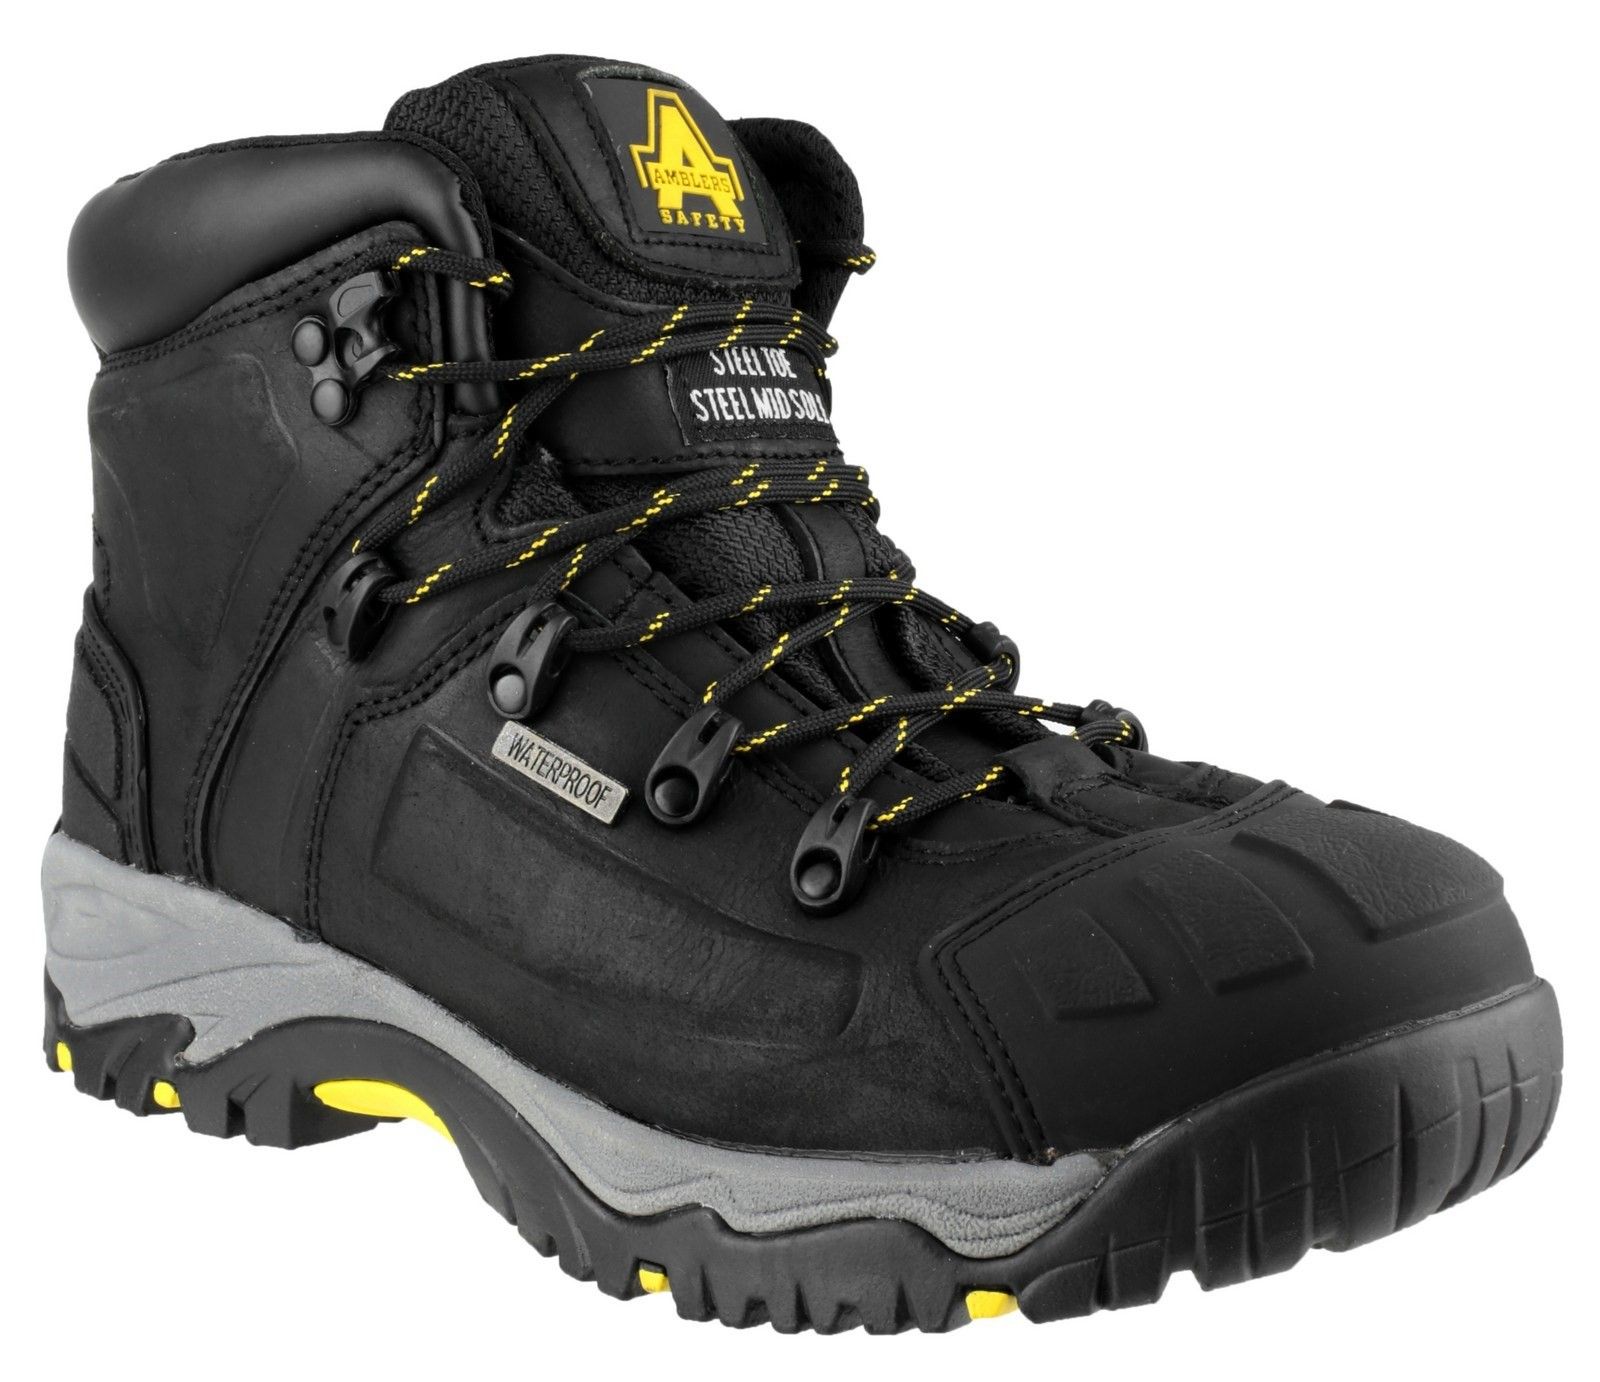 A durable, comfortable safety boot with inbuilt waterproof breathable membrane lining, antistatic, penetration protection and 300 degree heat resistant outsole.Water resistant crazy horse leather upper. 
Breathable internal waterproof membrane. 
Moulded rubber toe and heel guard. 
PU padded collar. 
Steel toe and steel midsole.